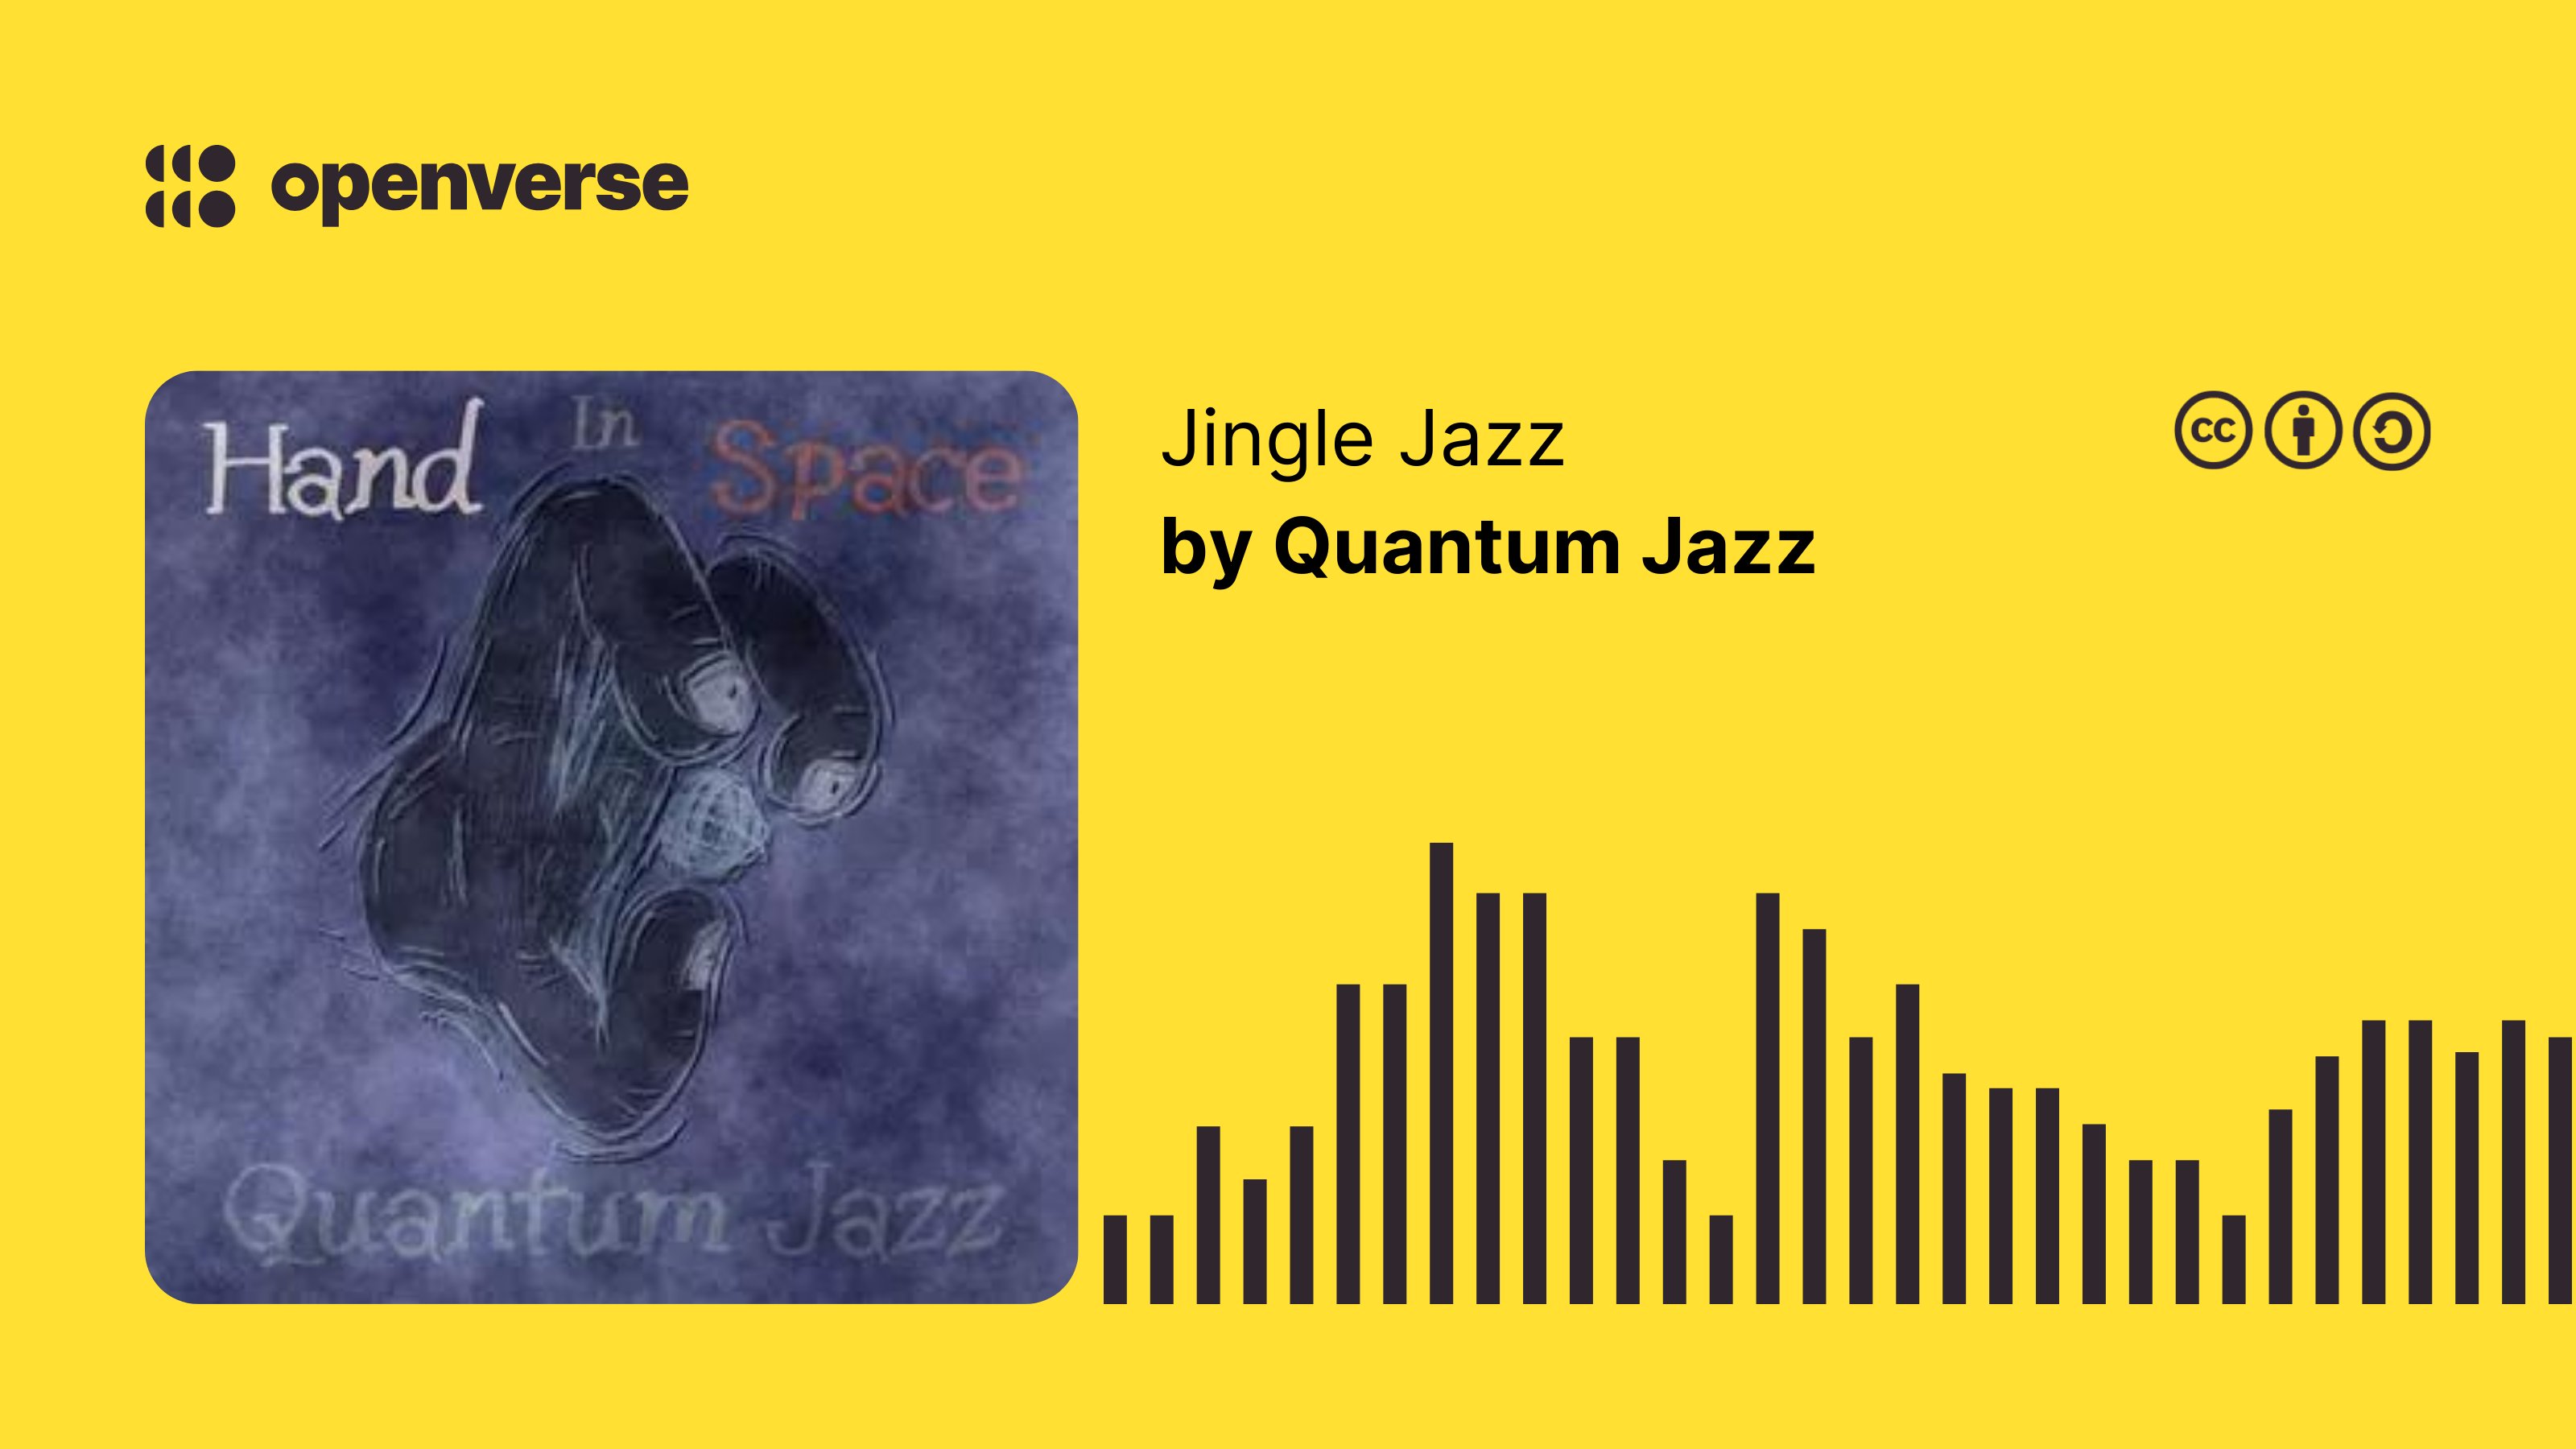 Yellow background with Openverse logo, audio wave and attribution credits: Jingle Jazz by Quantum Jazz.